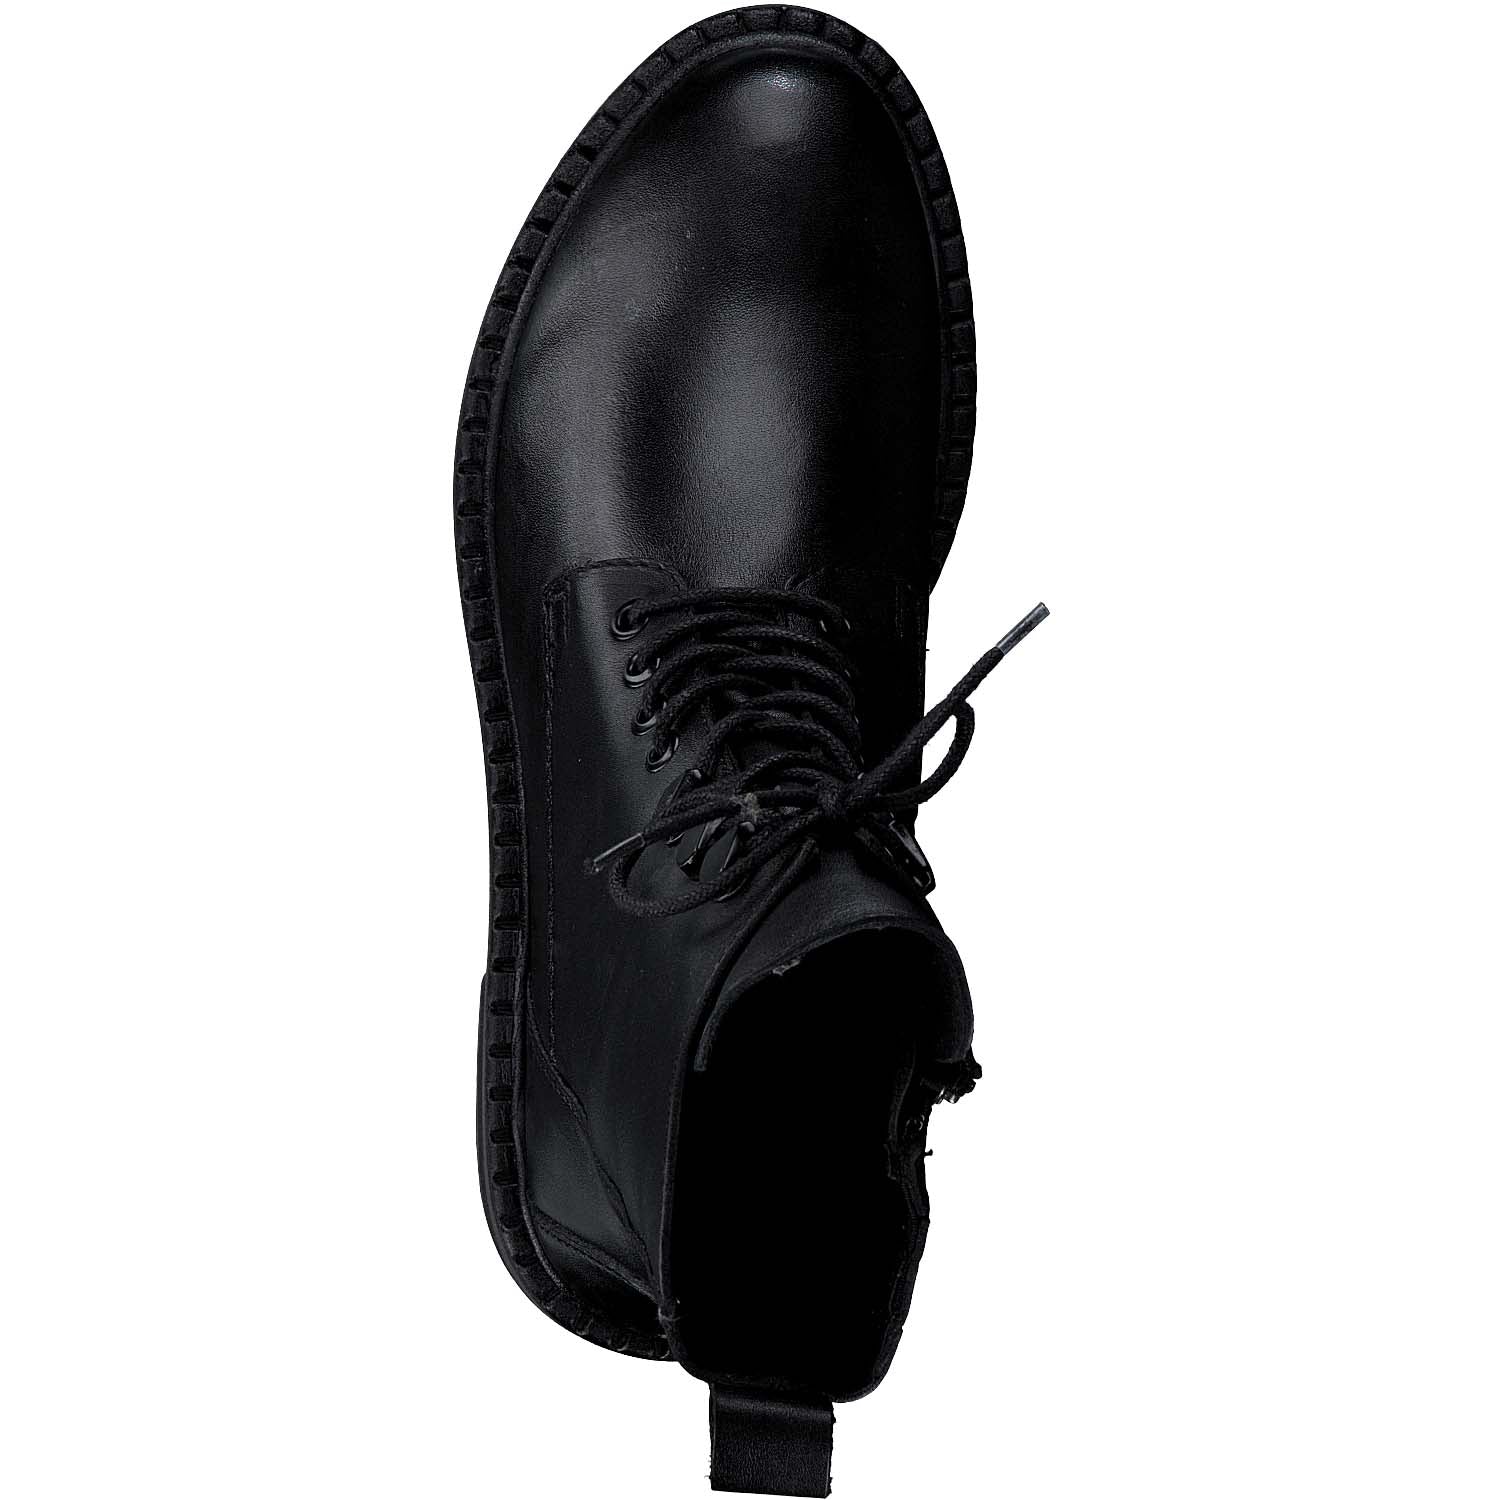 Front view of the Marco Tozzi Black Leather Combat Boot.